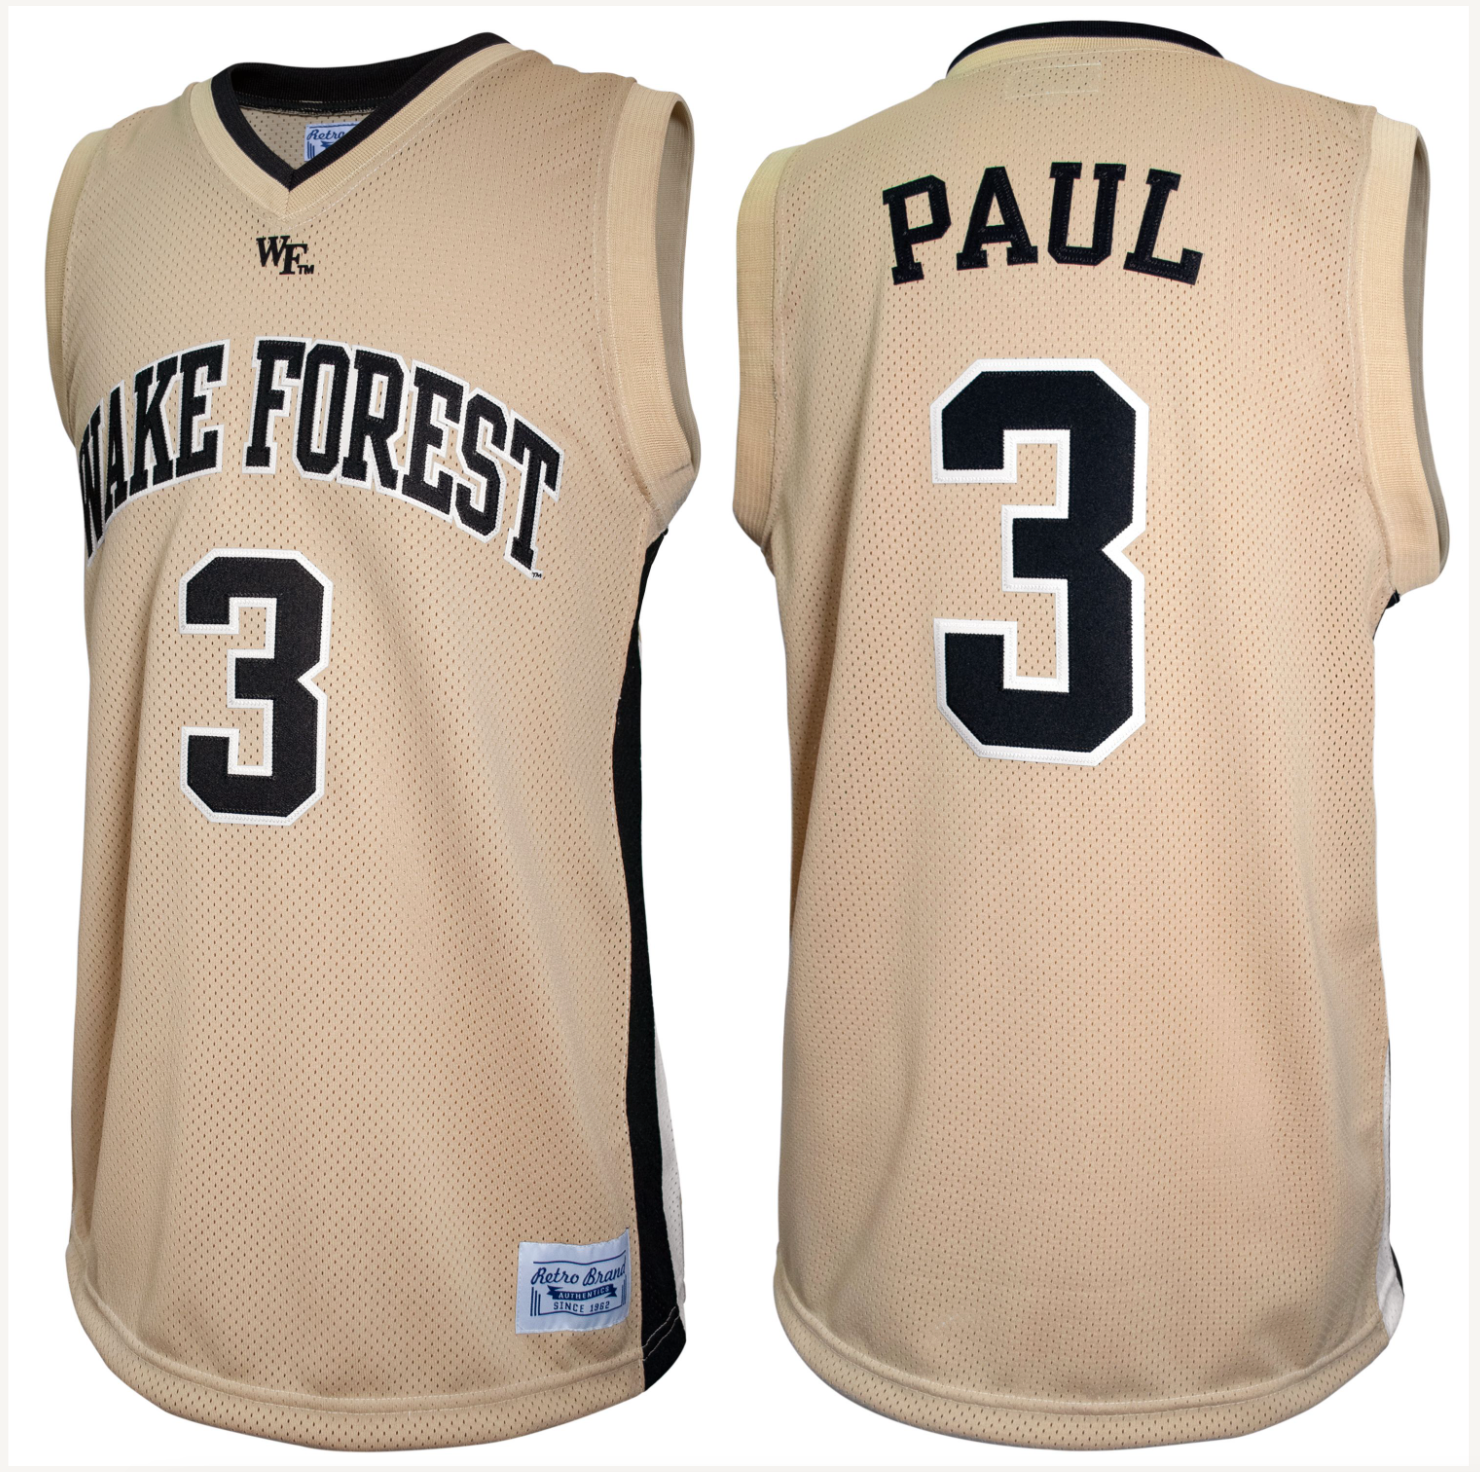 Wake Forest Chris Paul Throwback Jersey - S